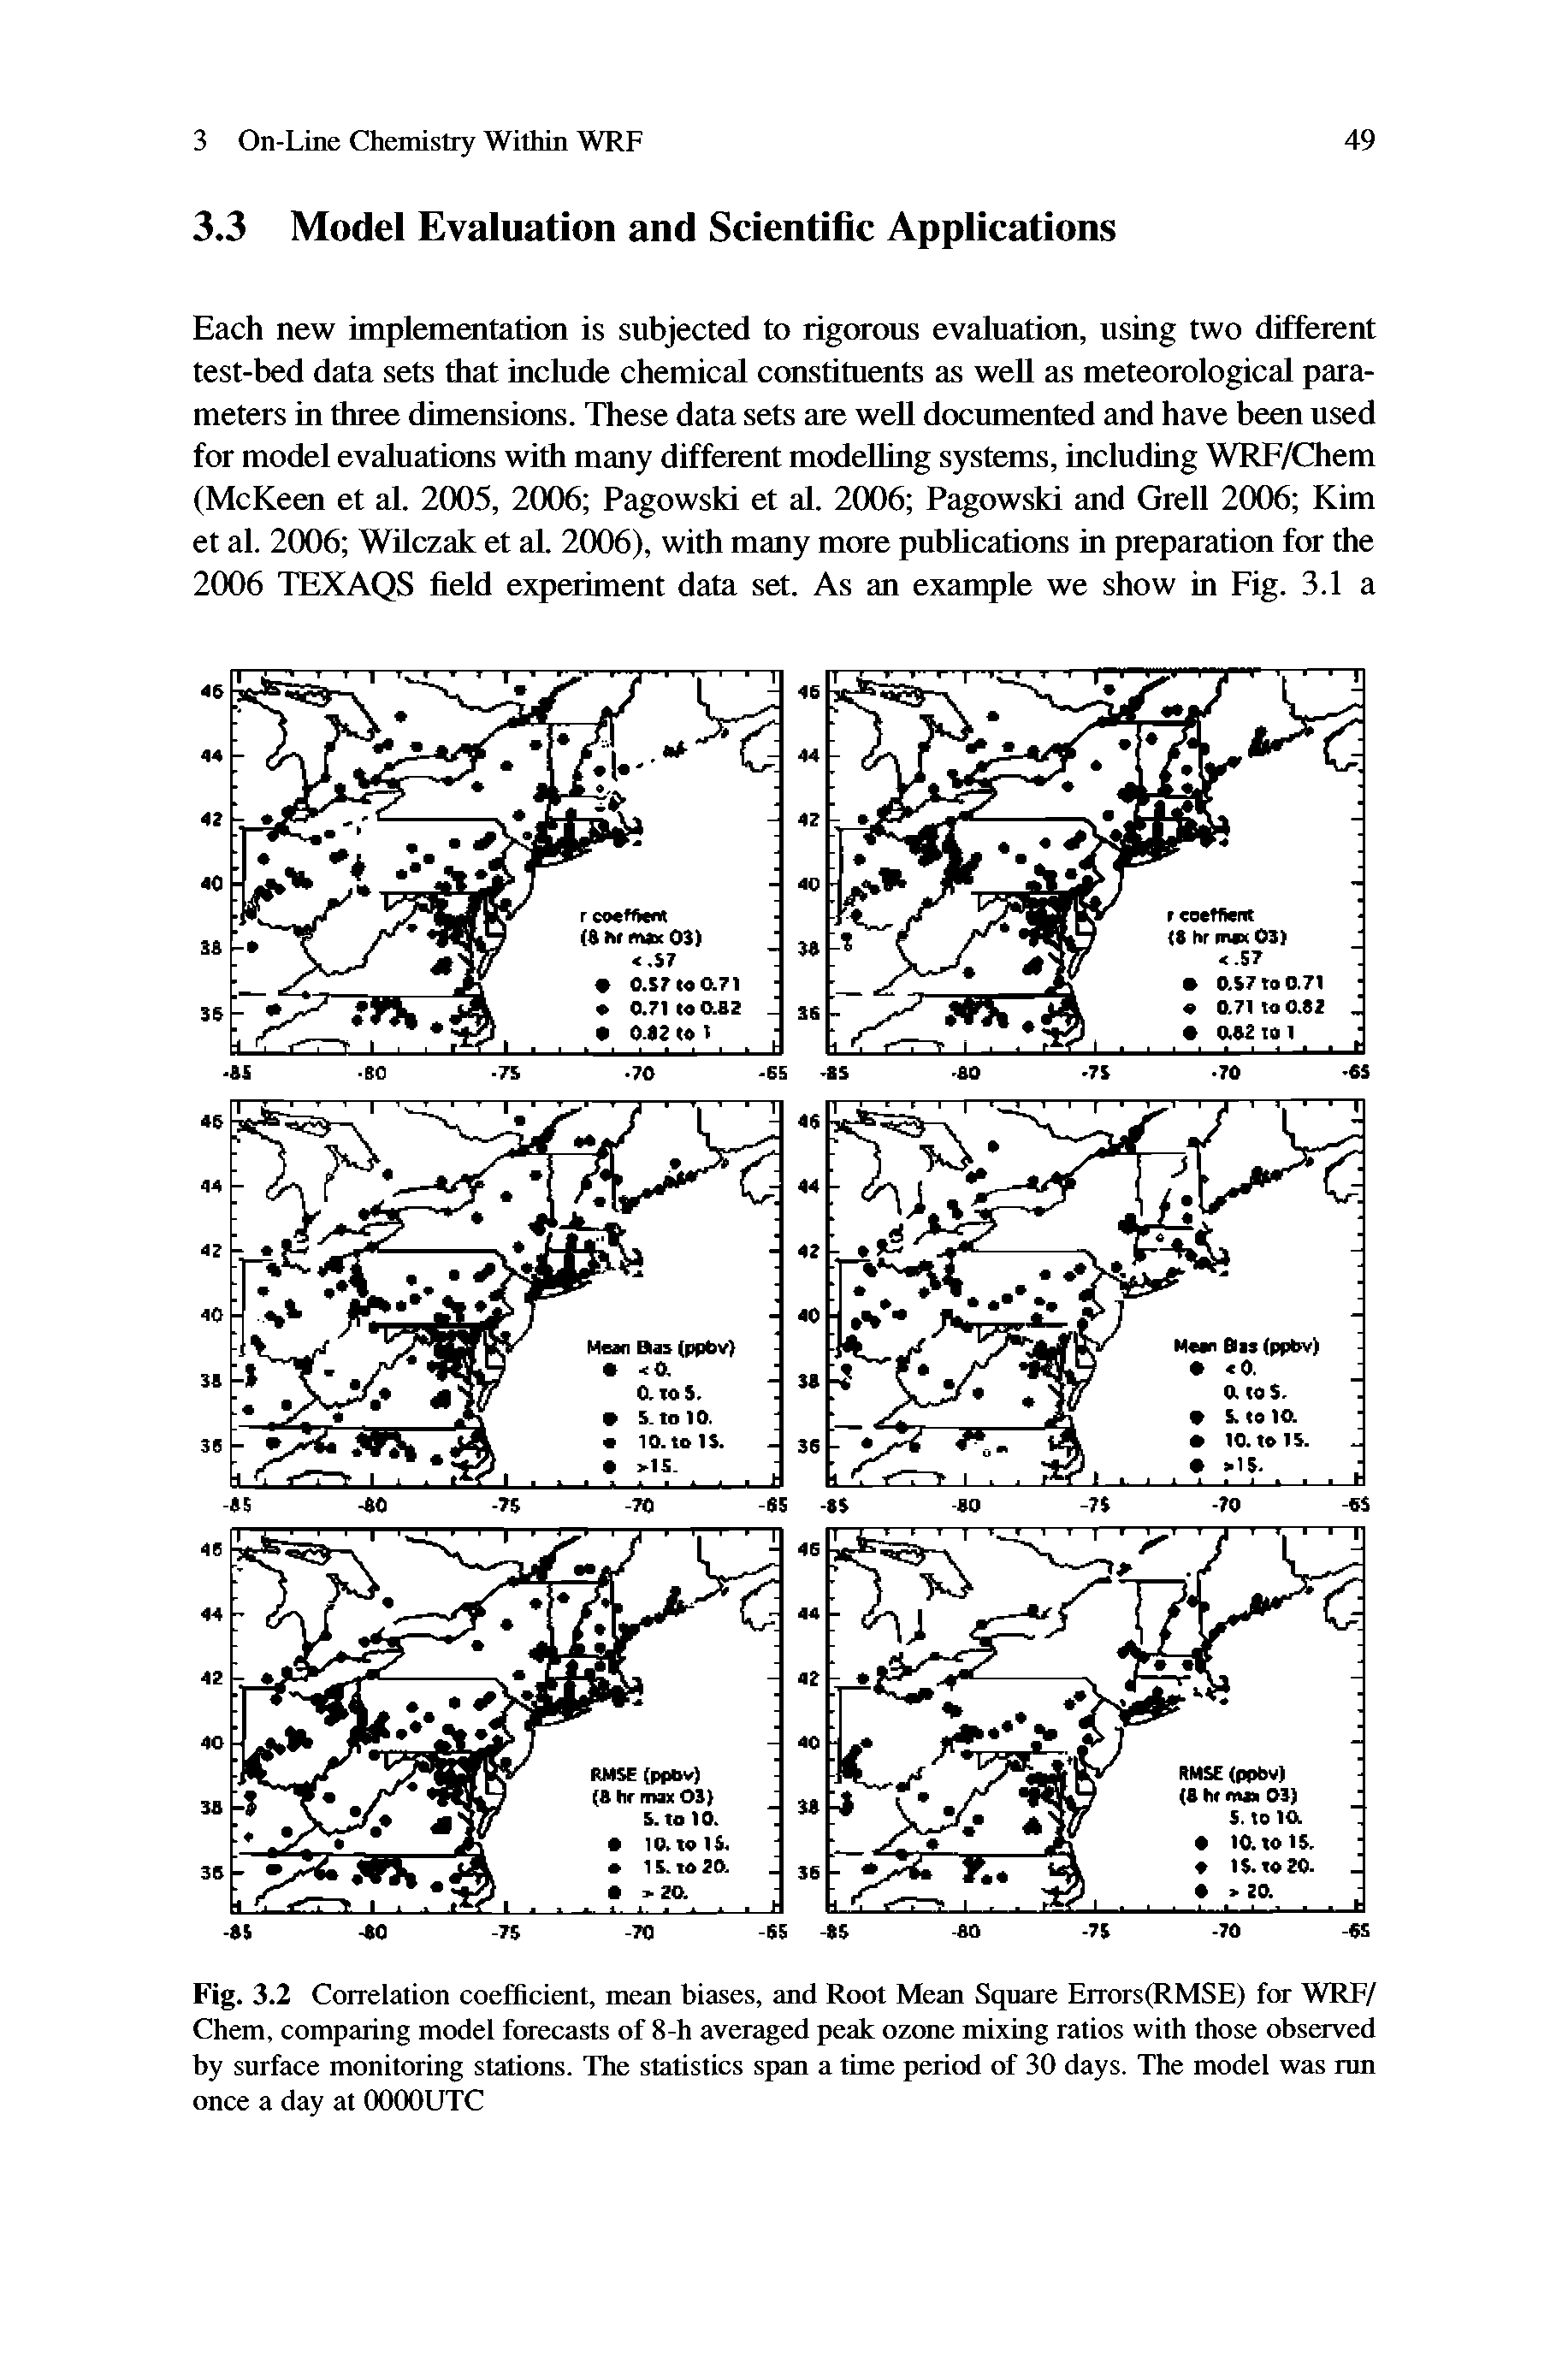 Fig. 3.2 Correlation coefficient, mean biases, and Root Mean Square Errors(RMSE) for WRF/ Chem, comparing model forecasts of 8-h averaged peak ozone mixing ratios with those observed by surface monitoring stations. The statistics span a time period of 30 days. The model was run once a day at OOOOUTC...